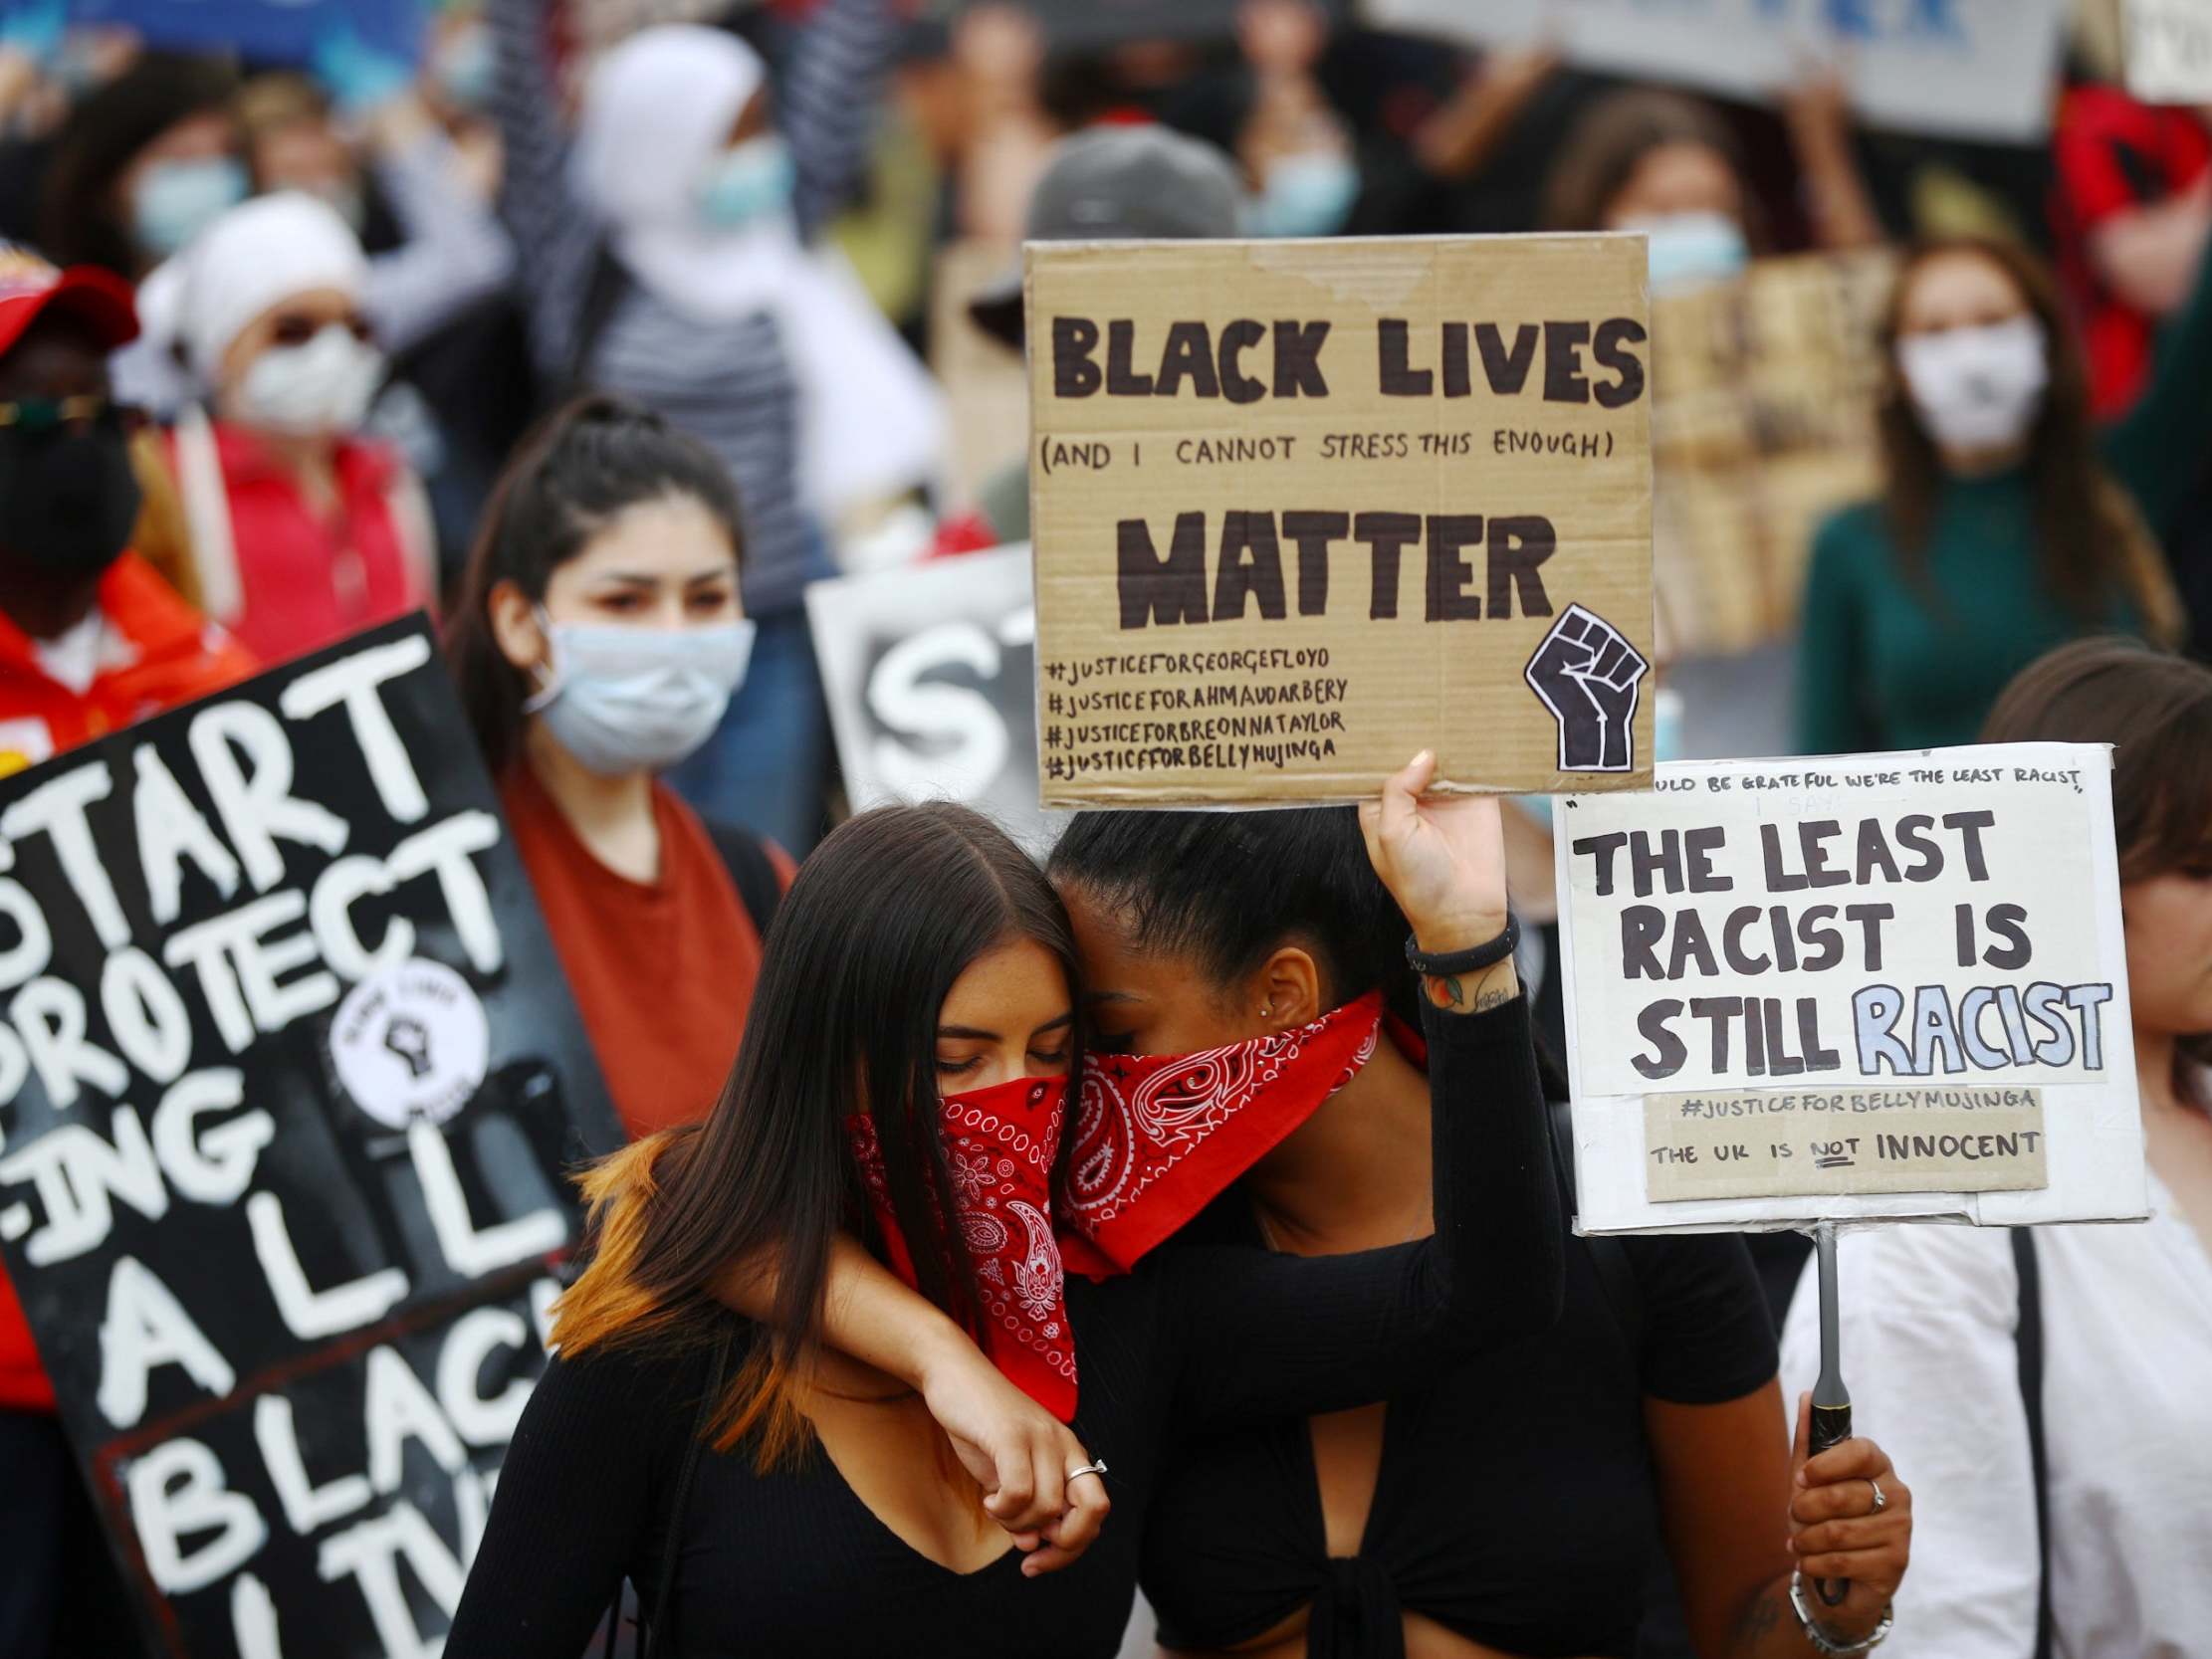 People wearing face coverings react as they hold banners in Hyde Park during a "Black Lives Matter" protest following the death of George Floyd who died in police custody in Minneapolis